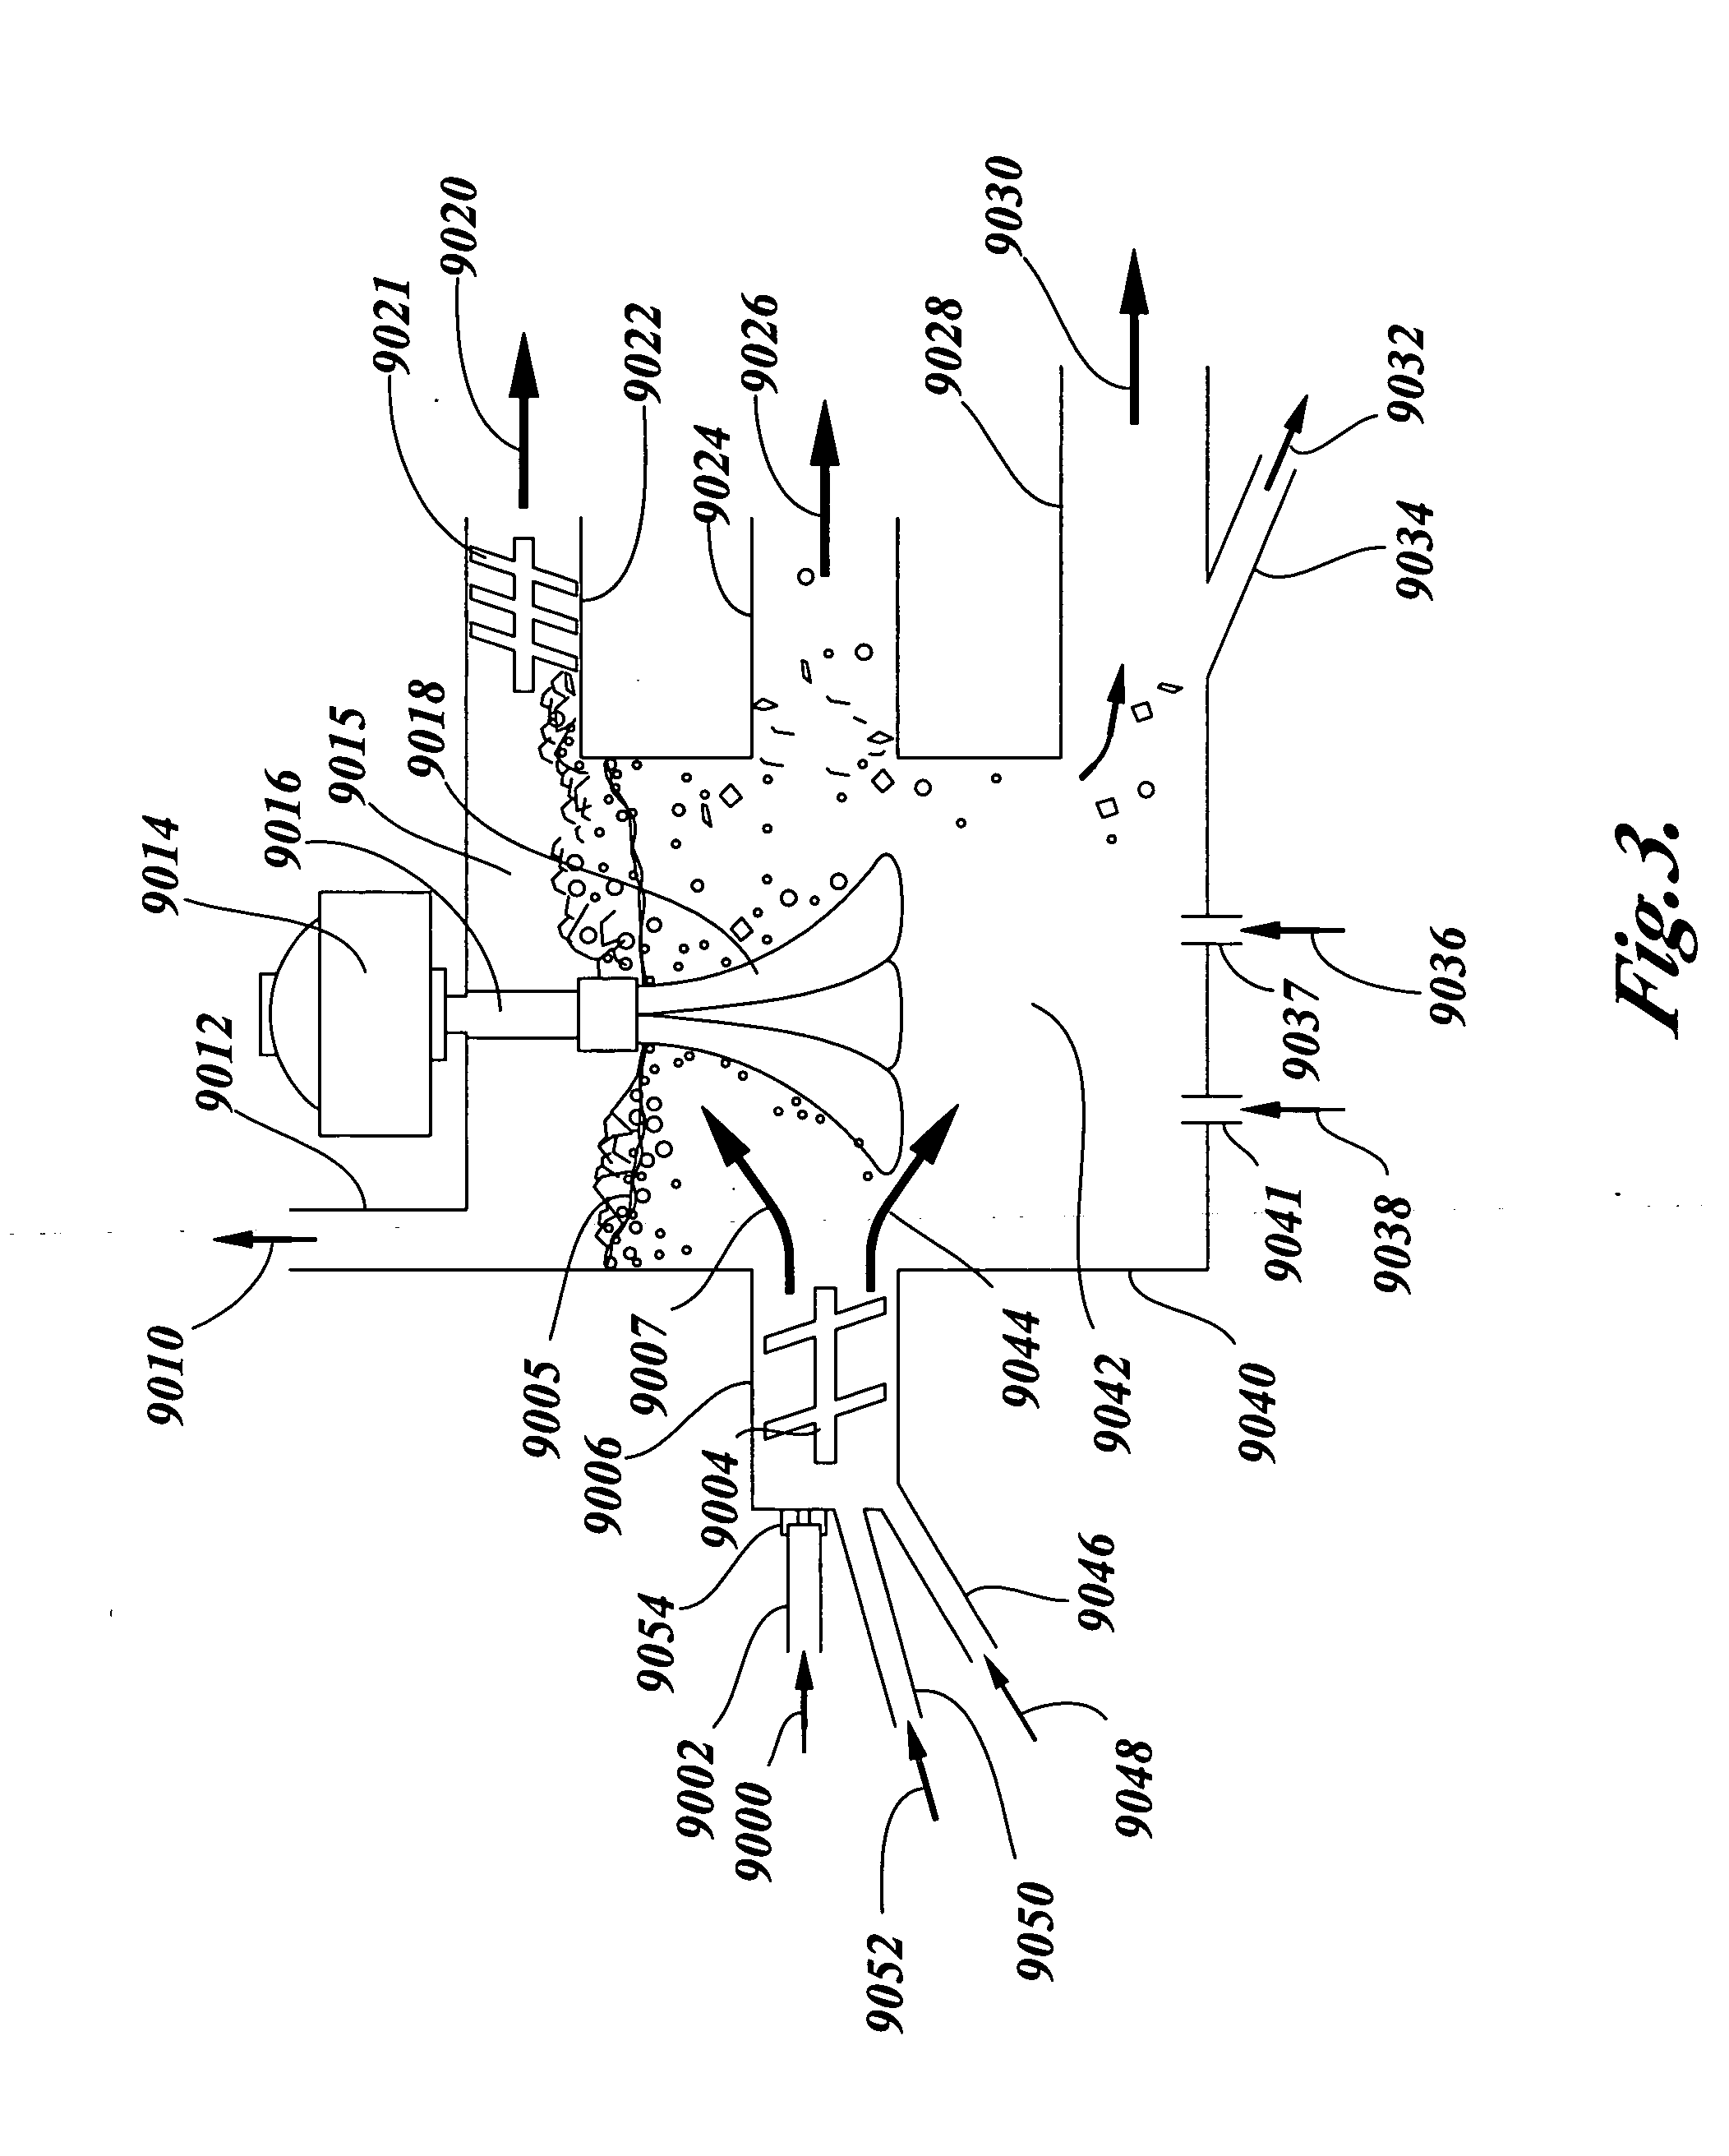 Methods for separating tallow from a single ingredient stream of boneless beef using liquid carbon dioxide and carbonic acid at elevated pressures